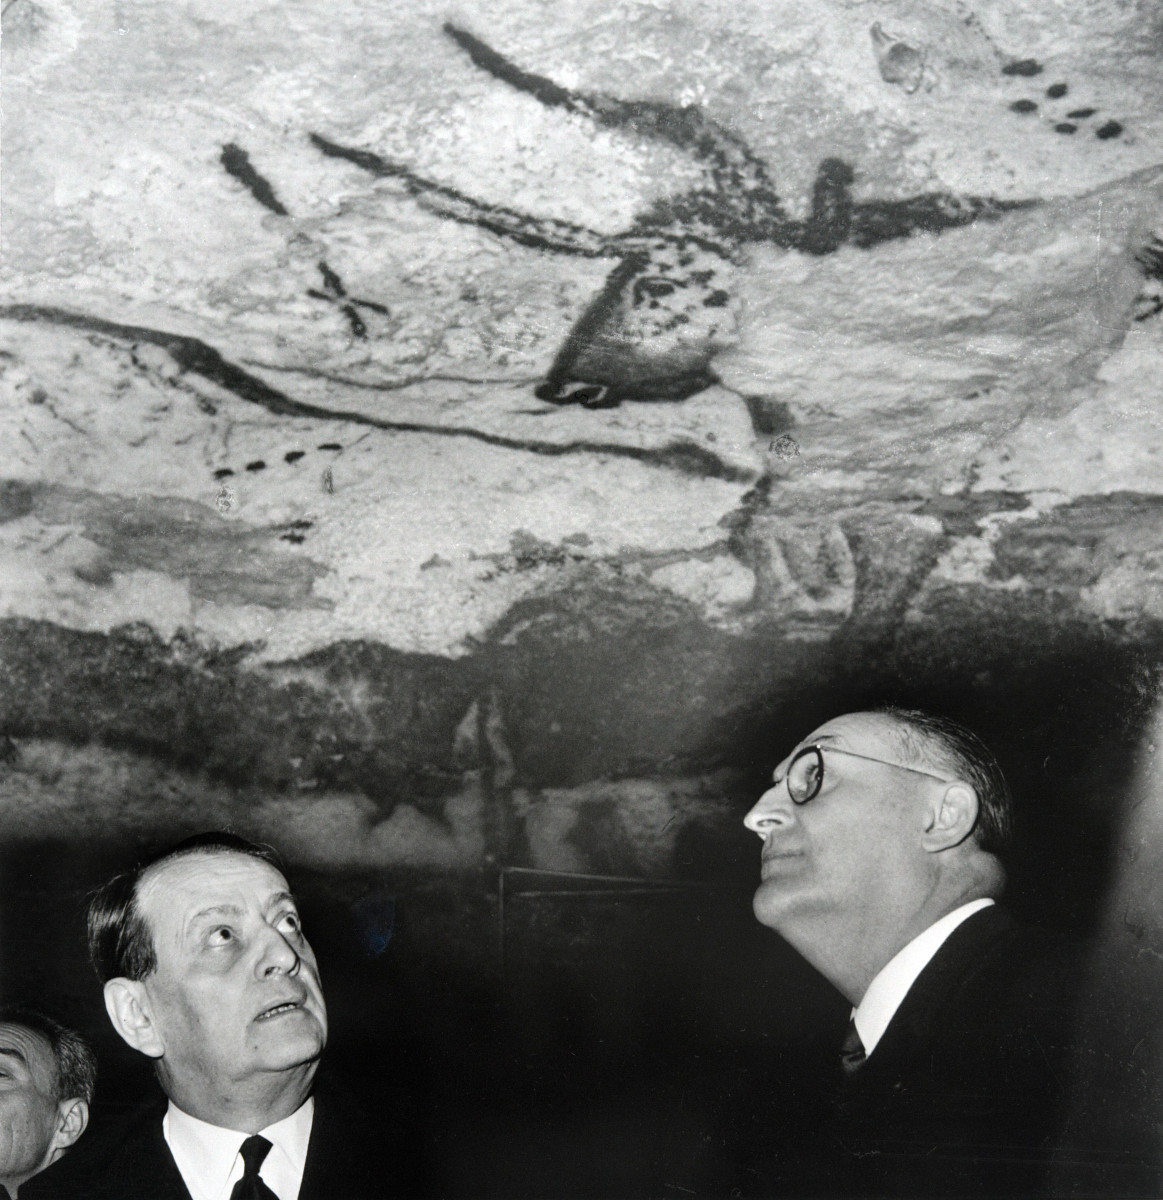 French Minister for Culture Andre Malraux (L) looks at the prehistoric paintings during his visits at the Lascaux caves, on March 13th, 1967.